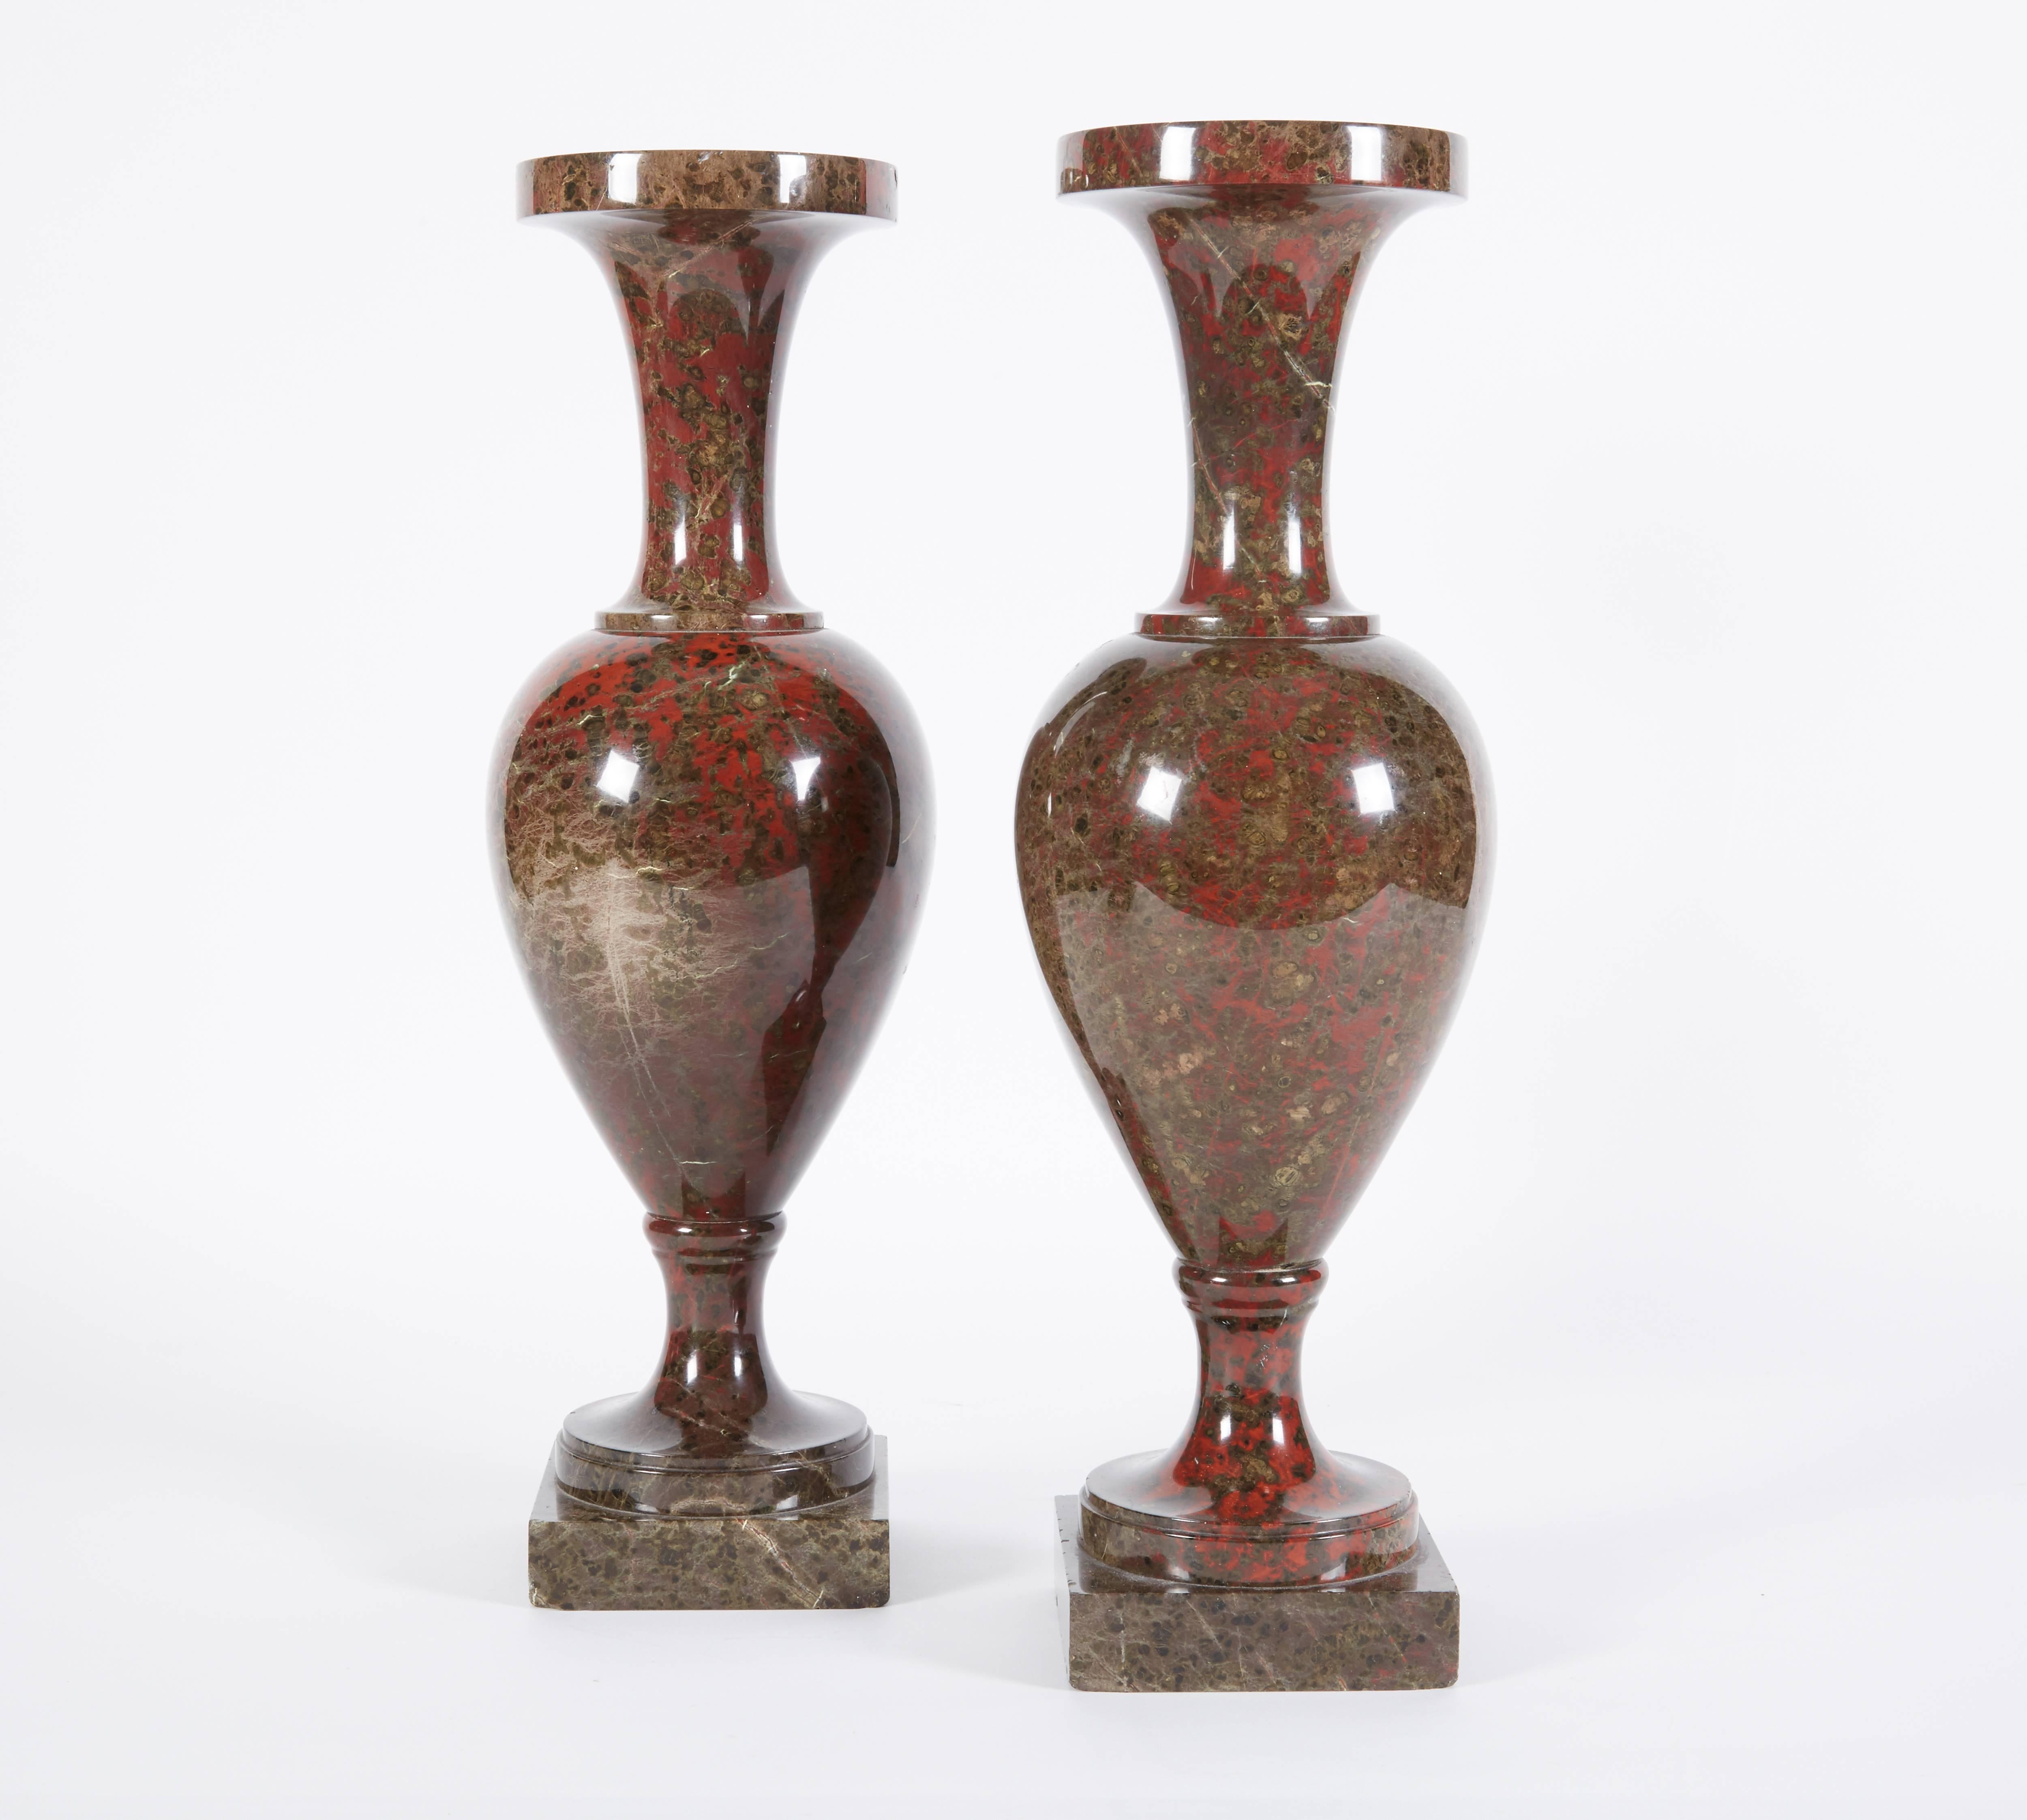 Grand Tour A Pair Of Neoclassical Lizard Serpentine Vases, Cornwall, England 19th century